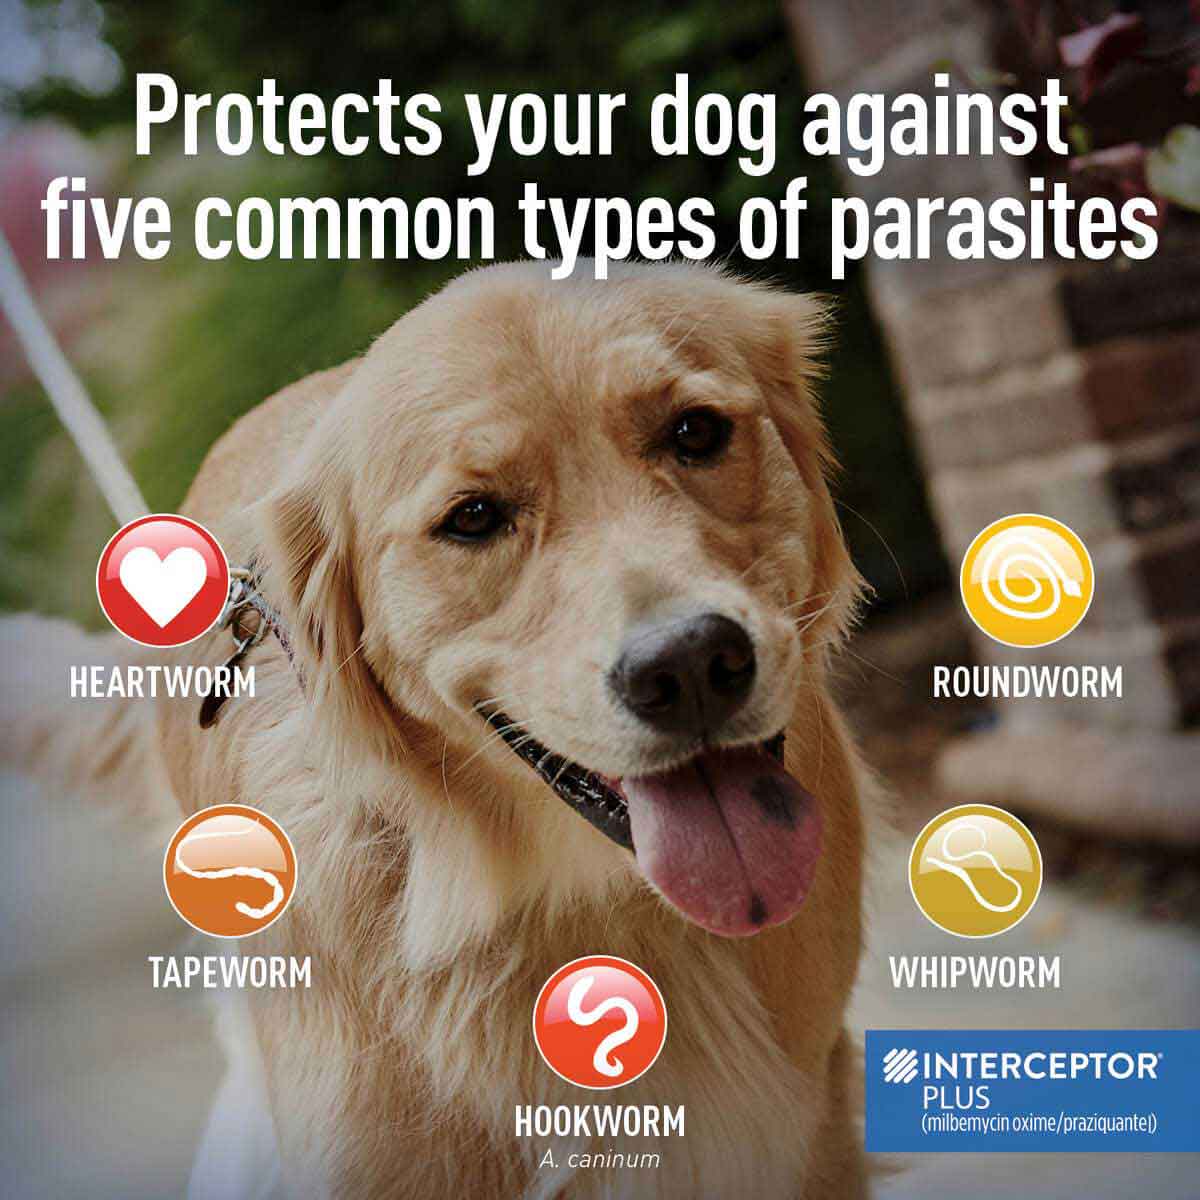 What Is Interceptor Plus For Dogs